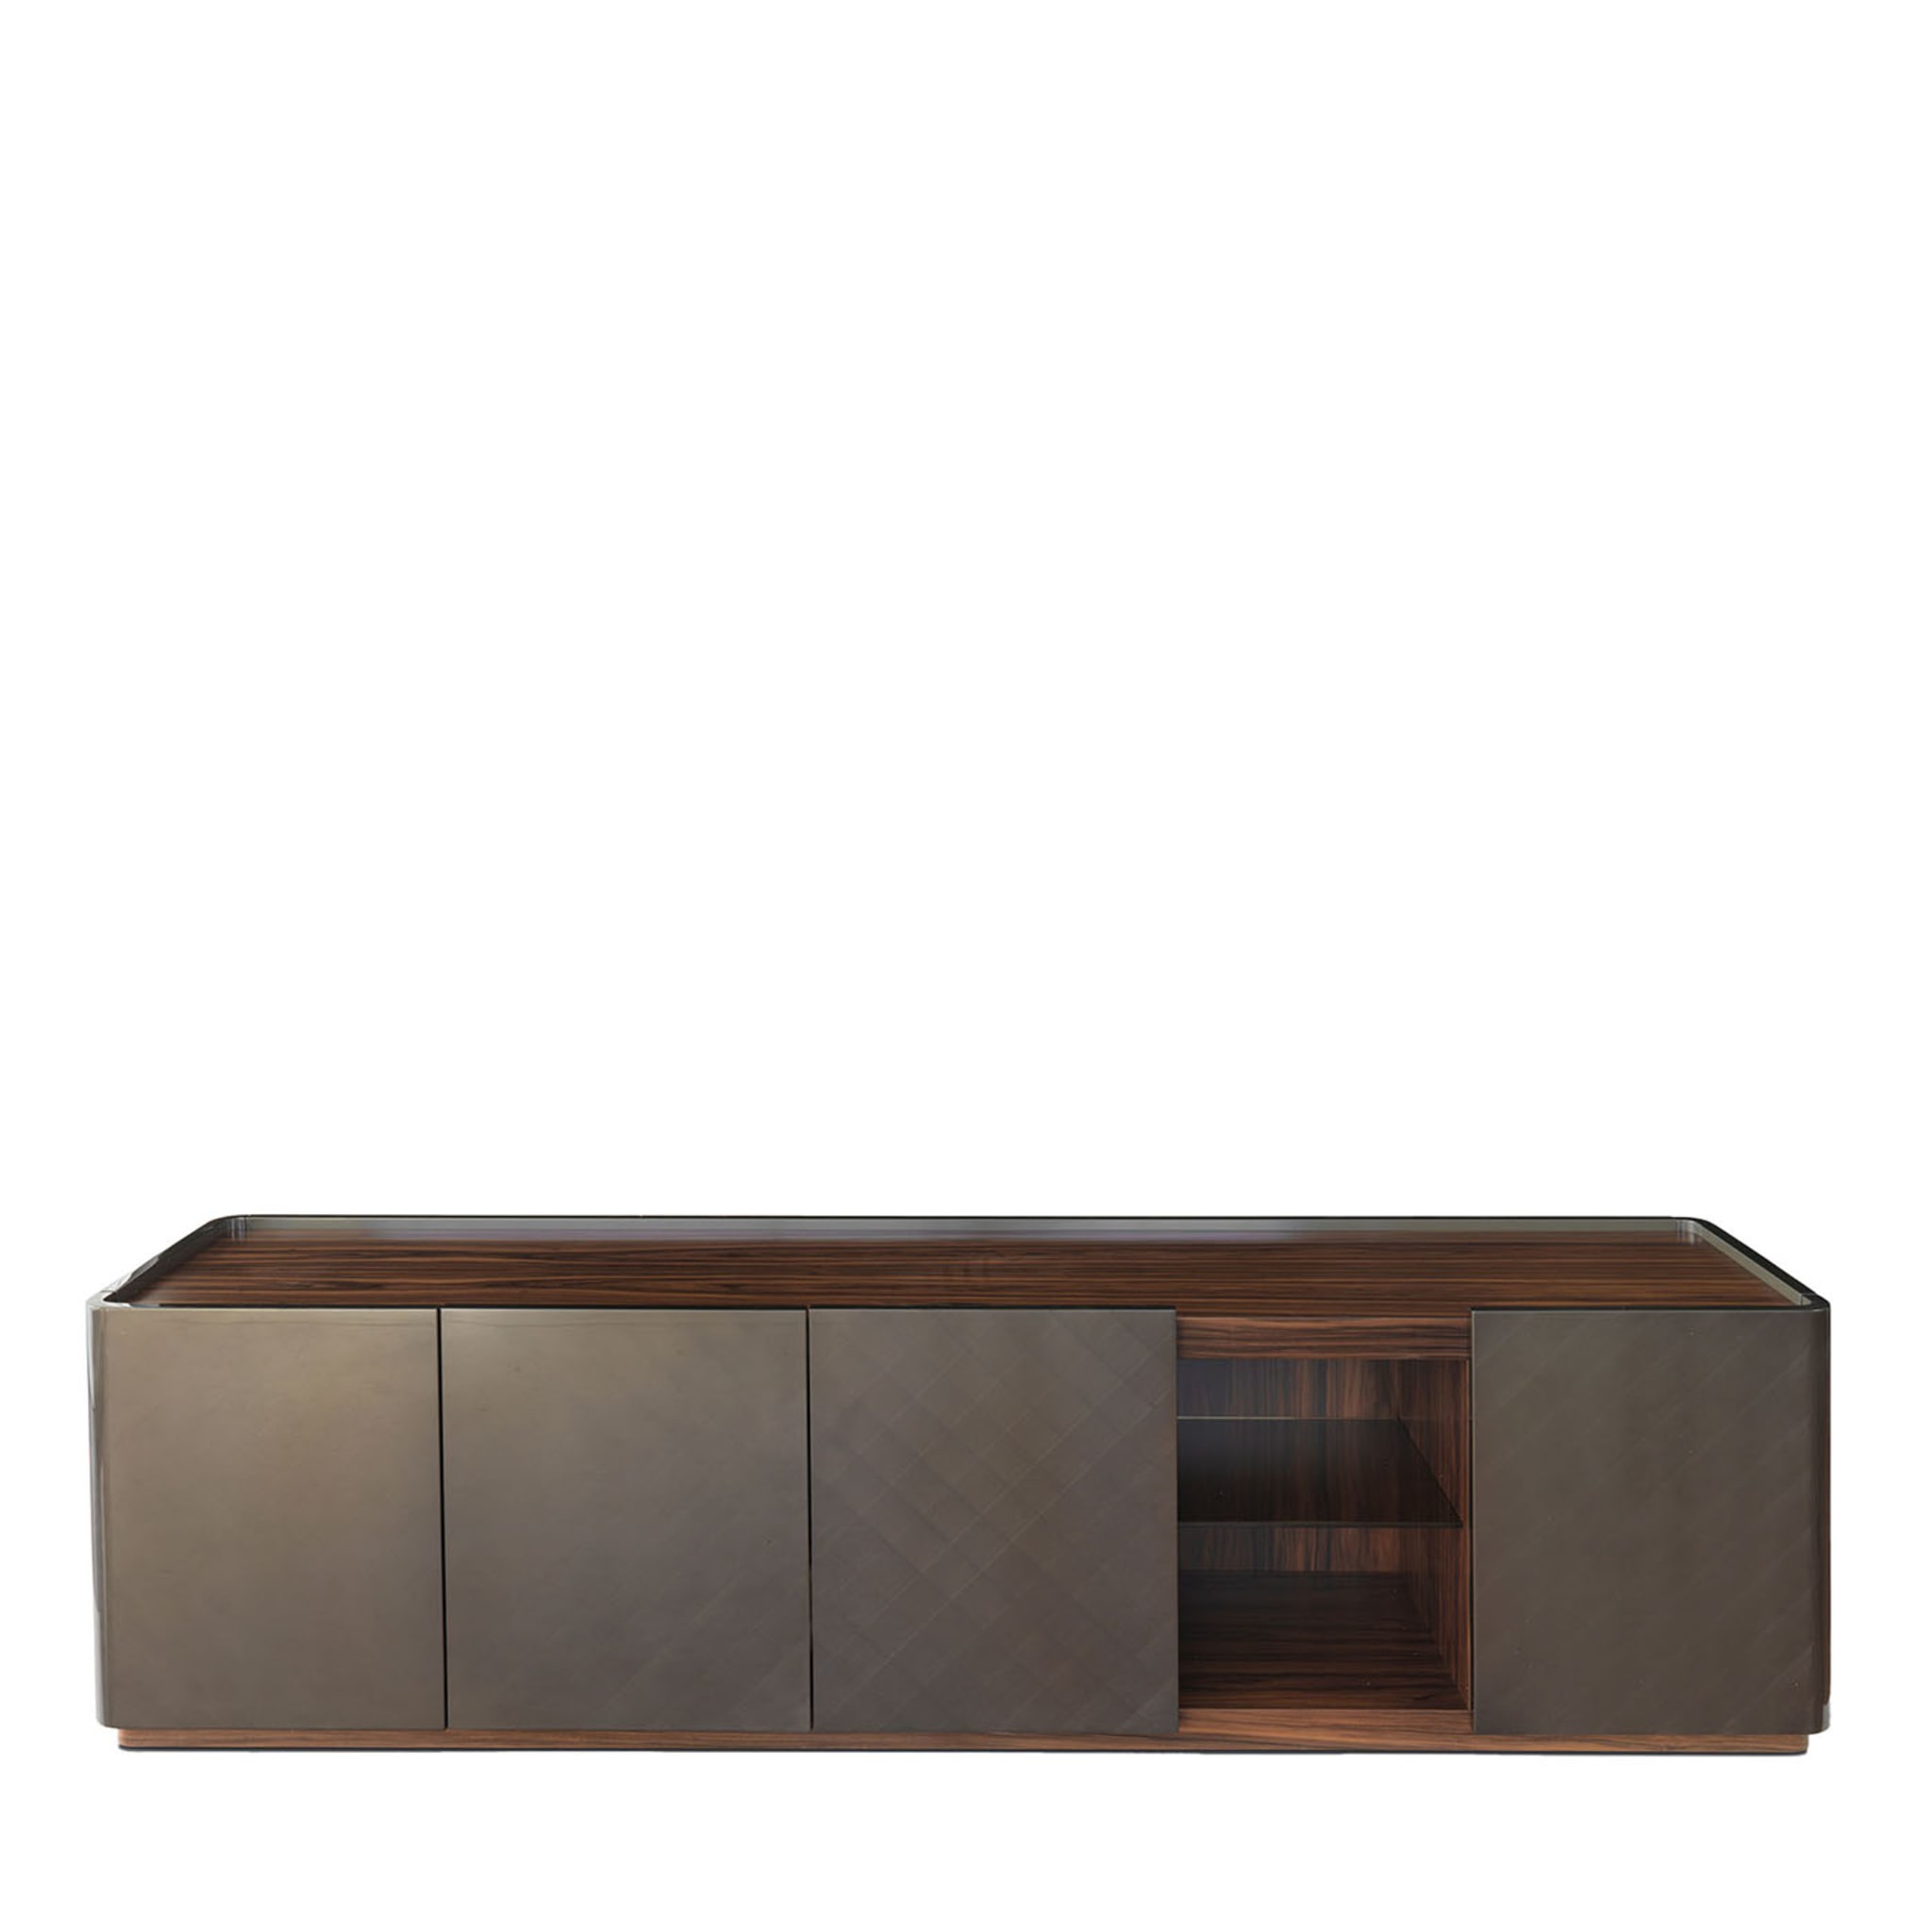 Moustique Sideboard #2 - Main view